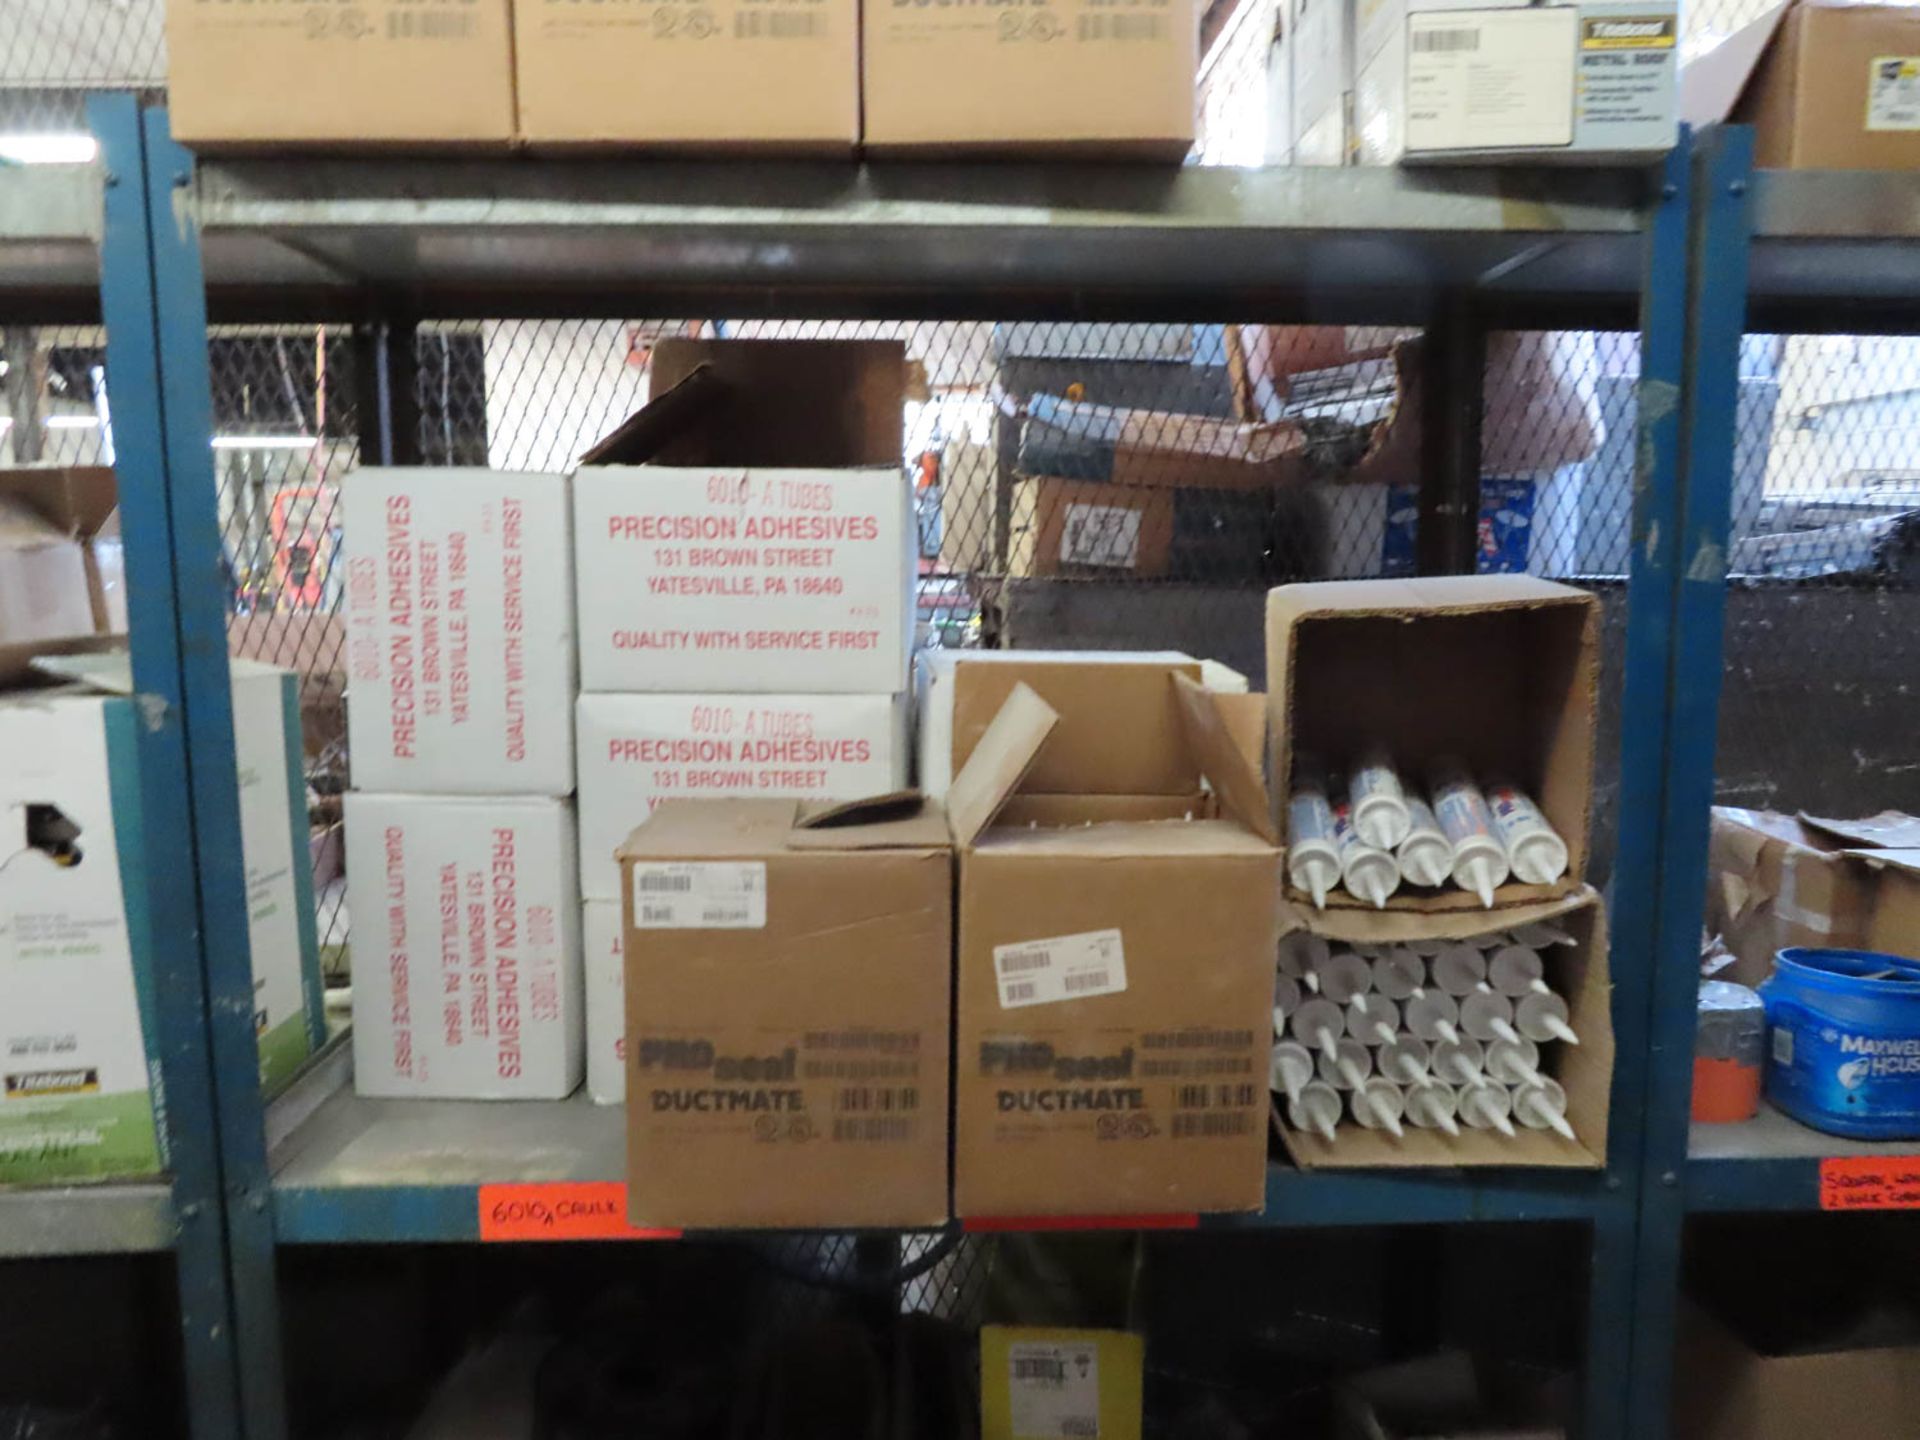 CONTENTS OF STOCK AREA: SCREWS, NUTS, BOLTS, SHELVES, CLAMPS, SEALANTS, ETC. (NO CAGE) - Image 4 of 5